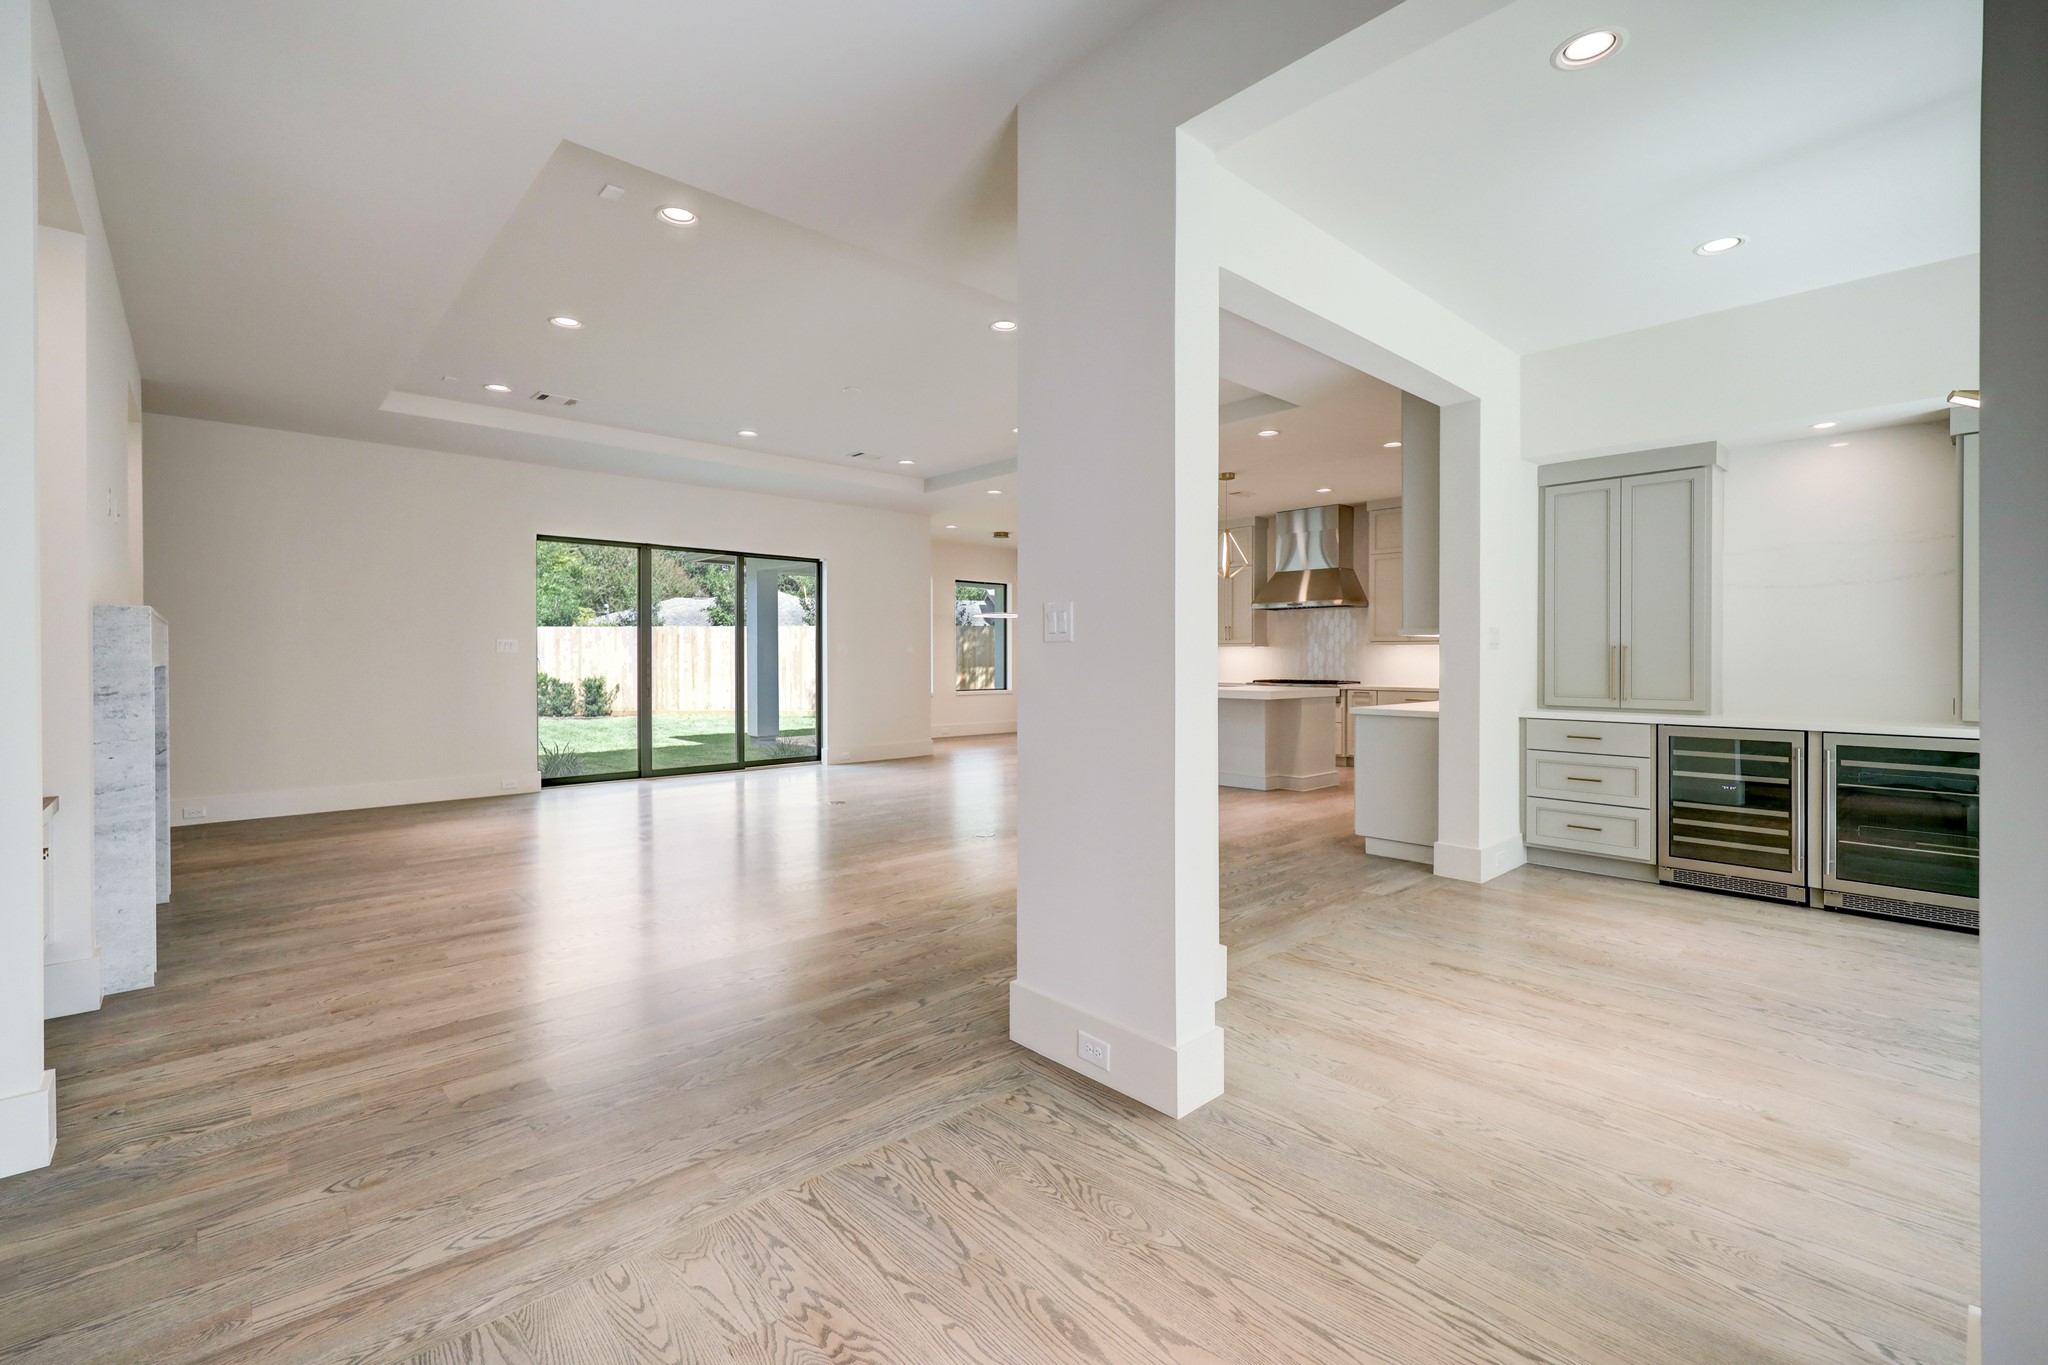 Solid wood flooring throughout the home except in the bathrooms and laundry room.